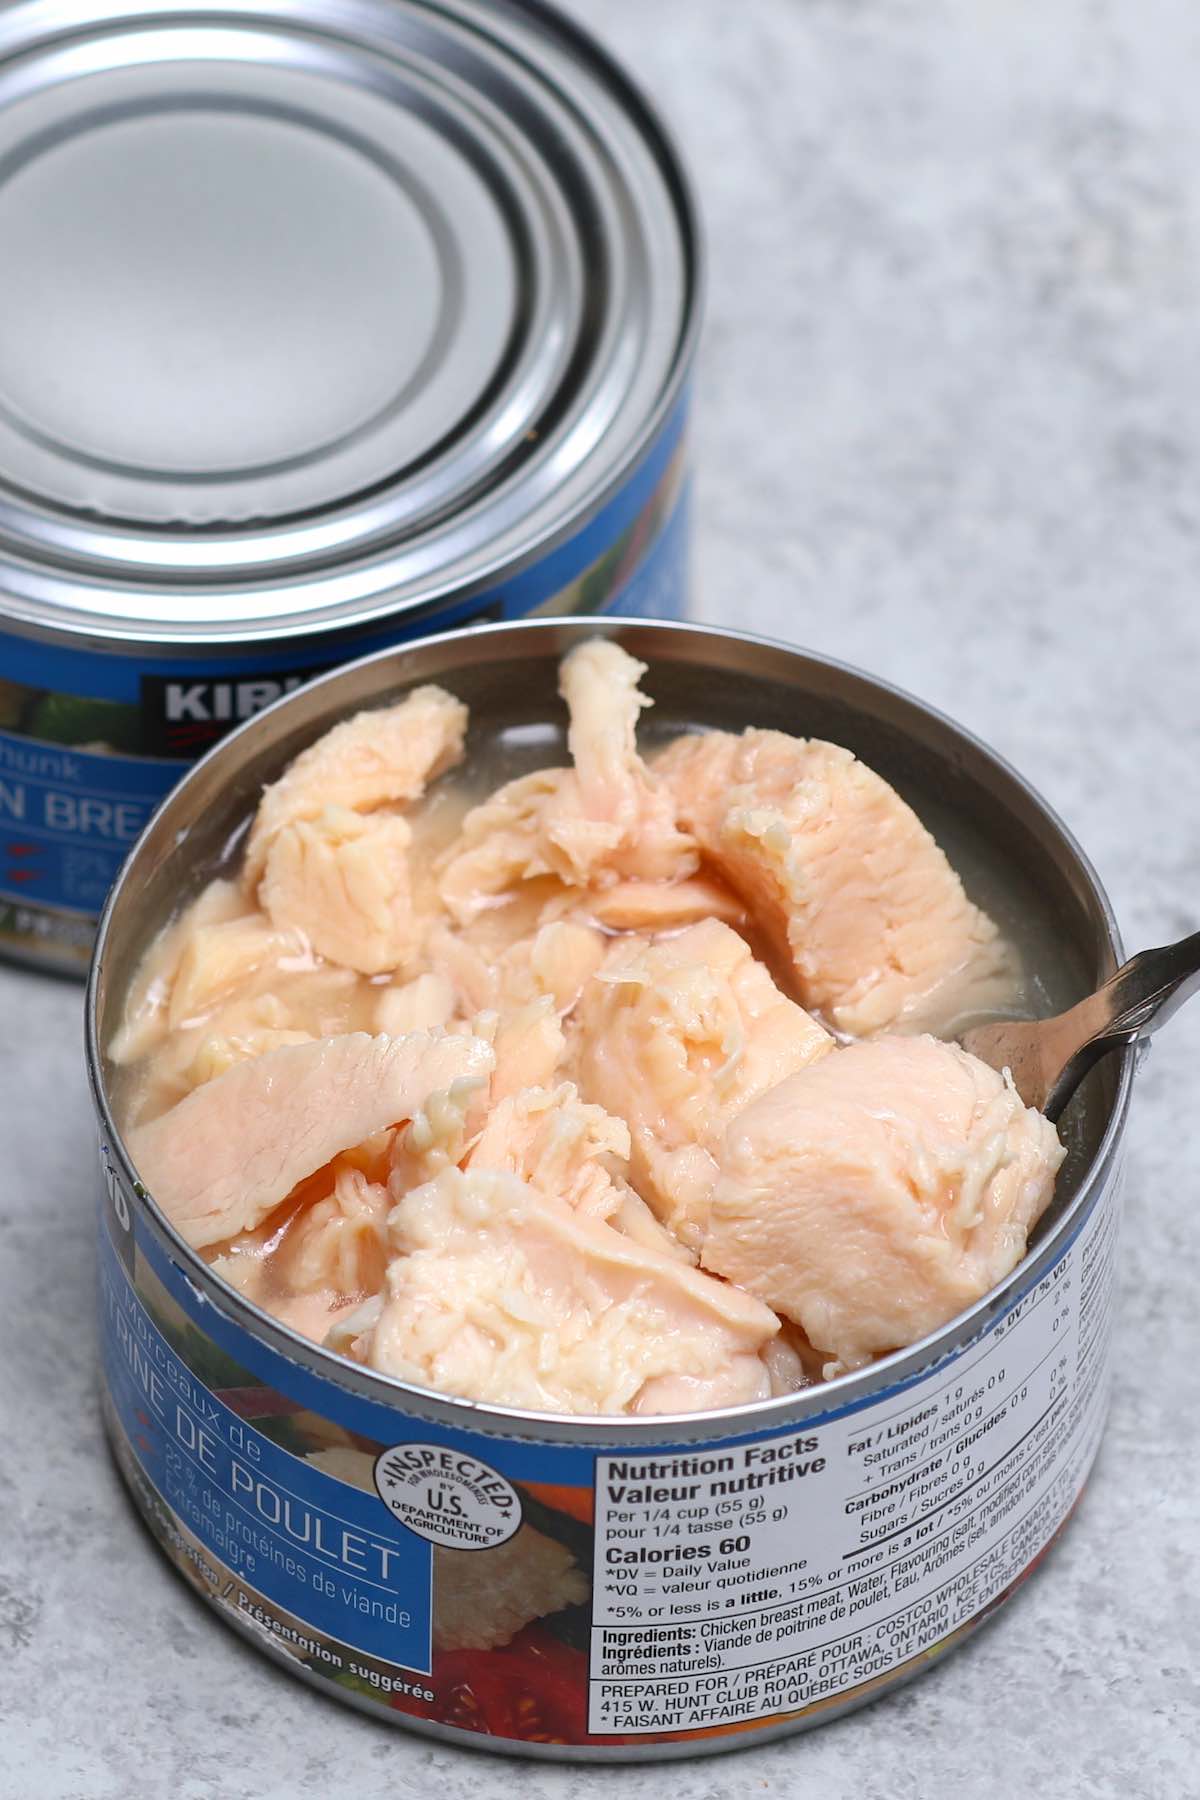 Canned chicken in the can.